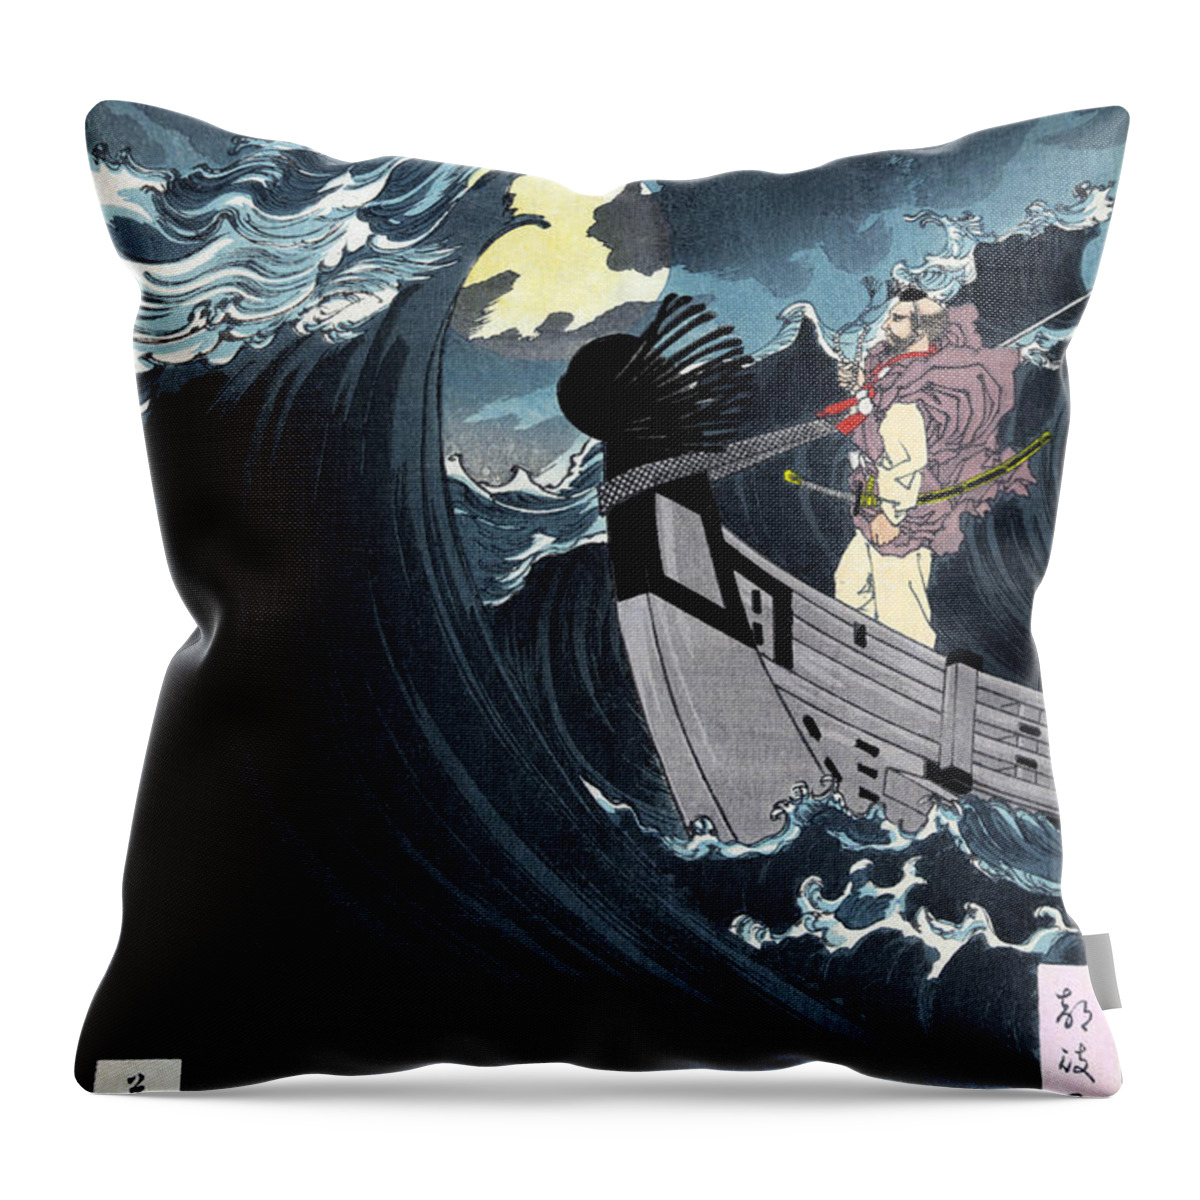 Religion Throw Pillow featuring the photograph Benkei, Japanese Warrior Monk, 12th by Science Source